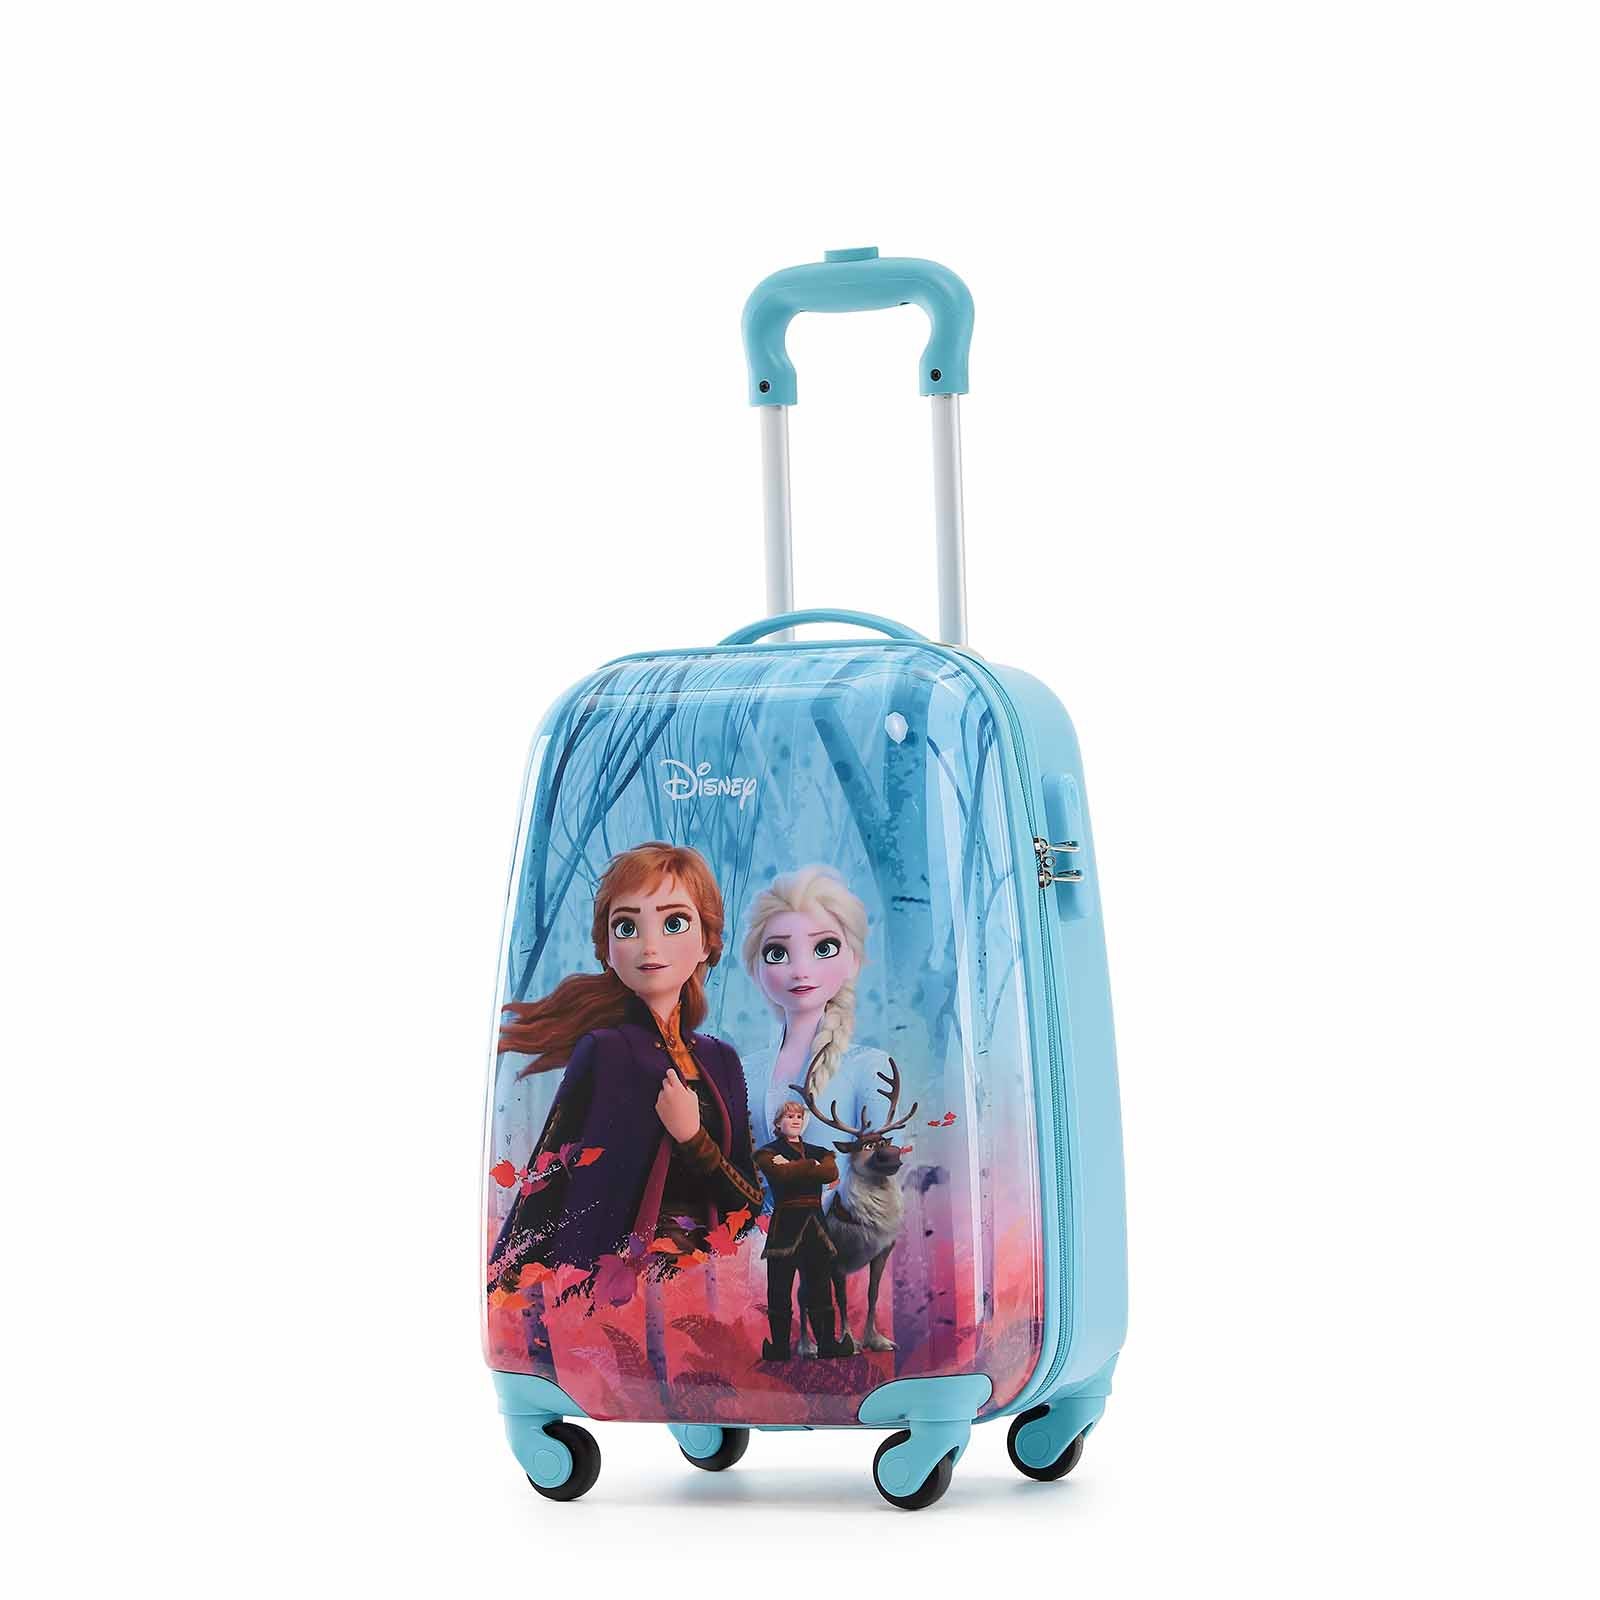 Disney Frozen 17 Inch Carry-On Suitcase